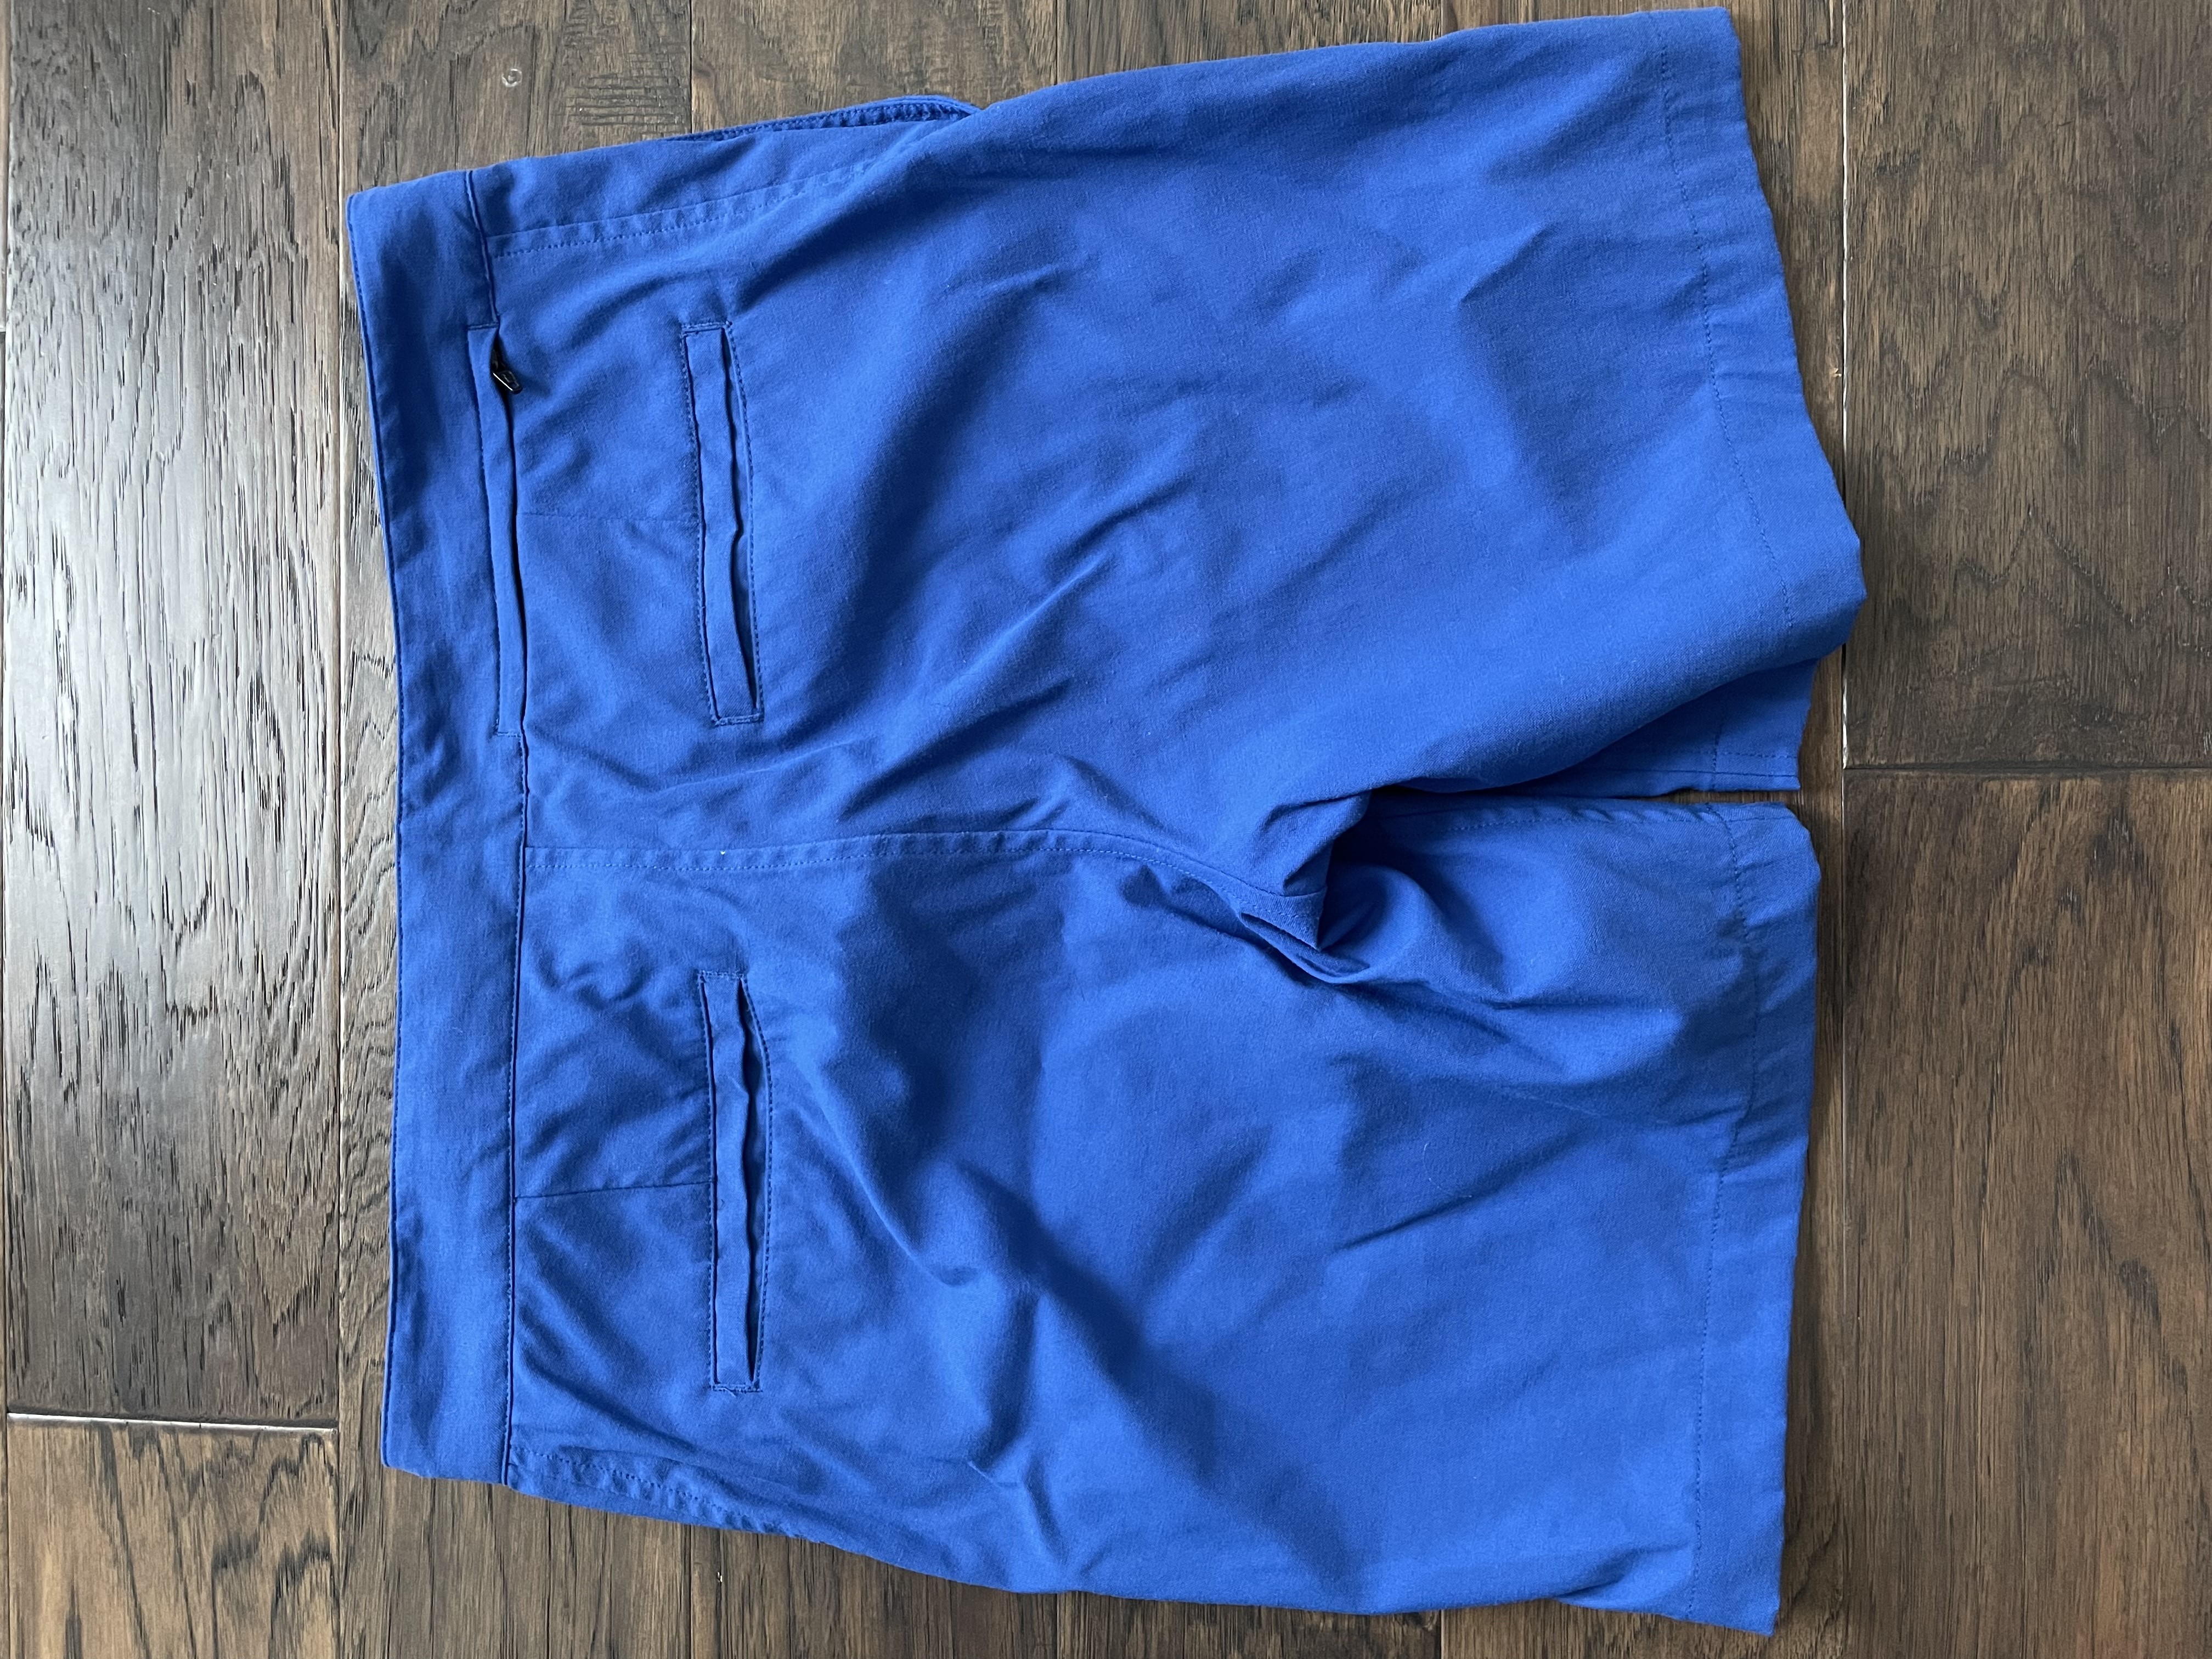 Outlier - Clean Way Shorts - 4